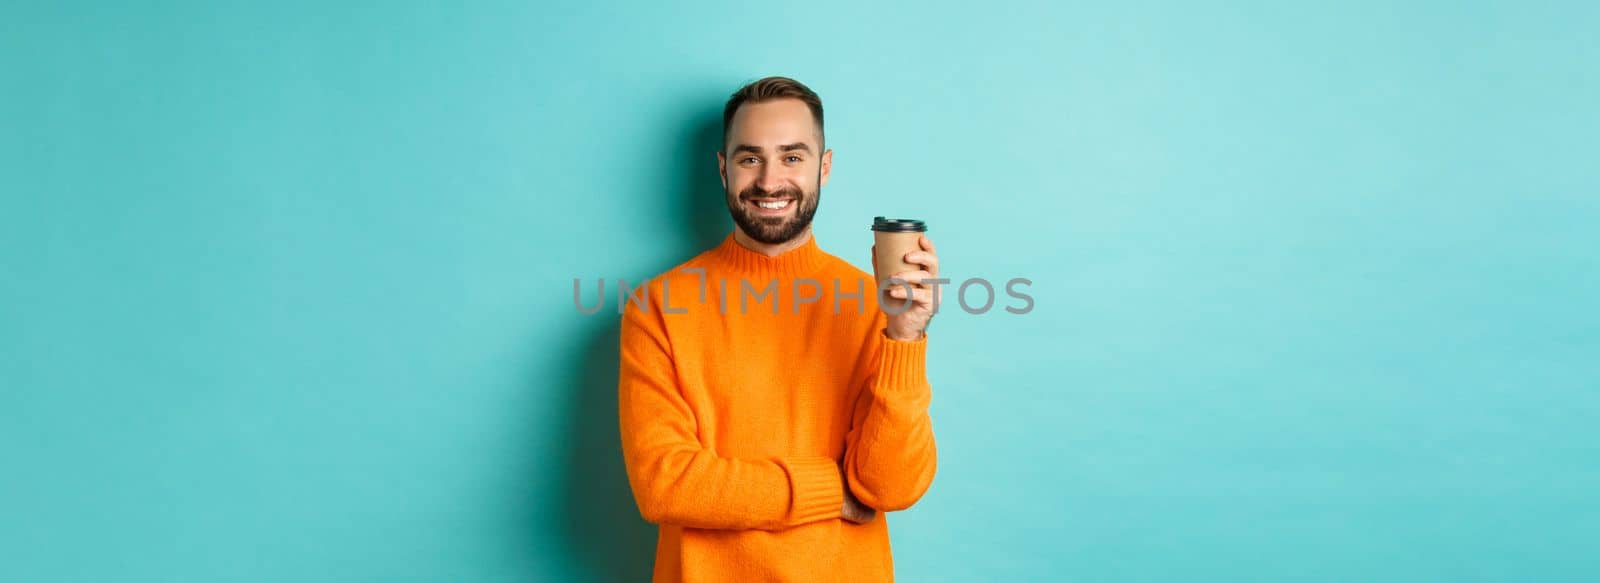 Handsome smiling man taking break, drinking coffee from takeaway, standing over blue background.